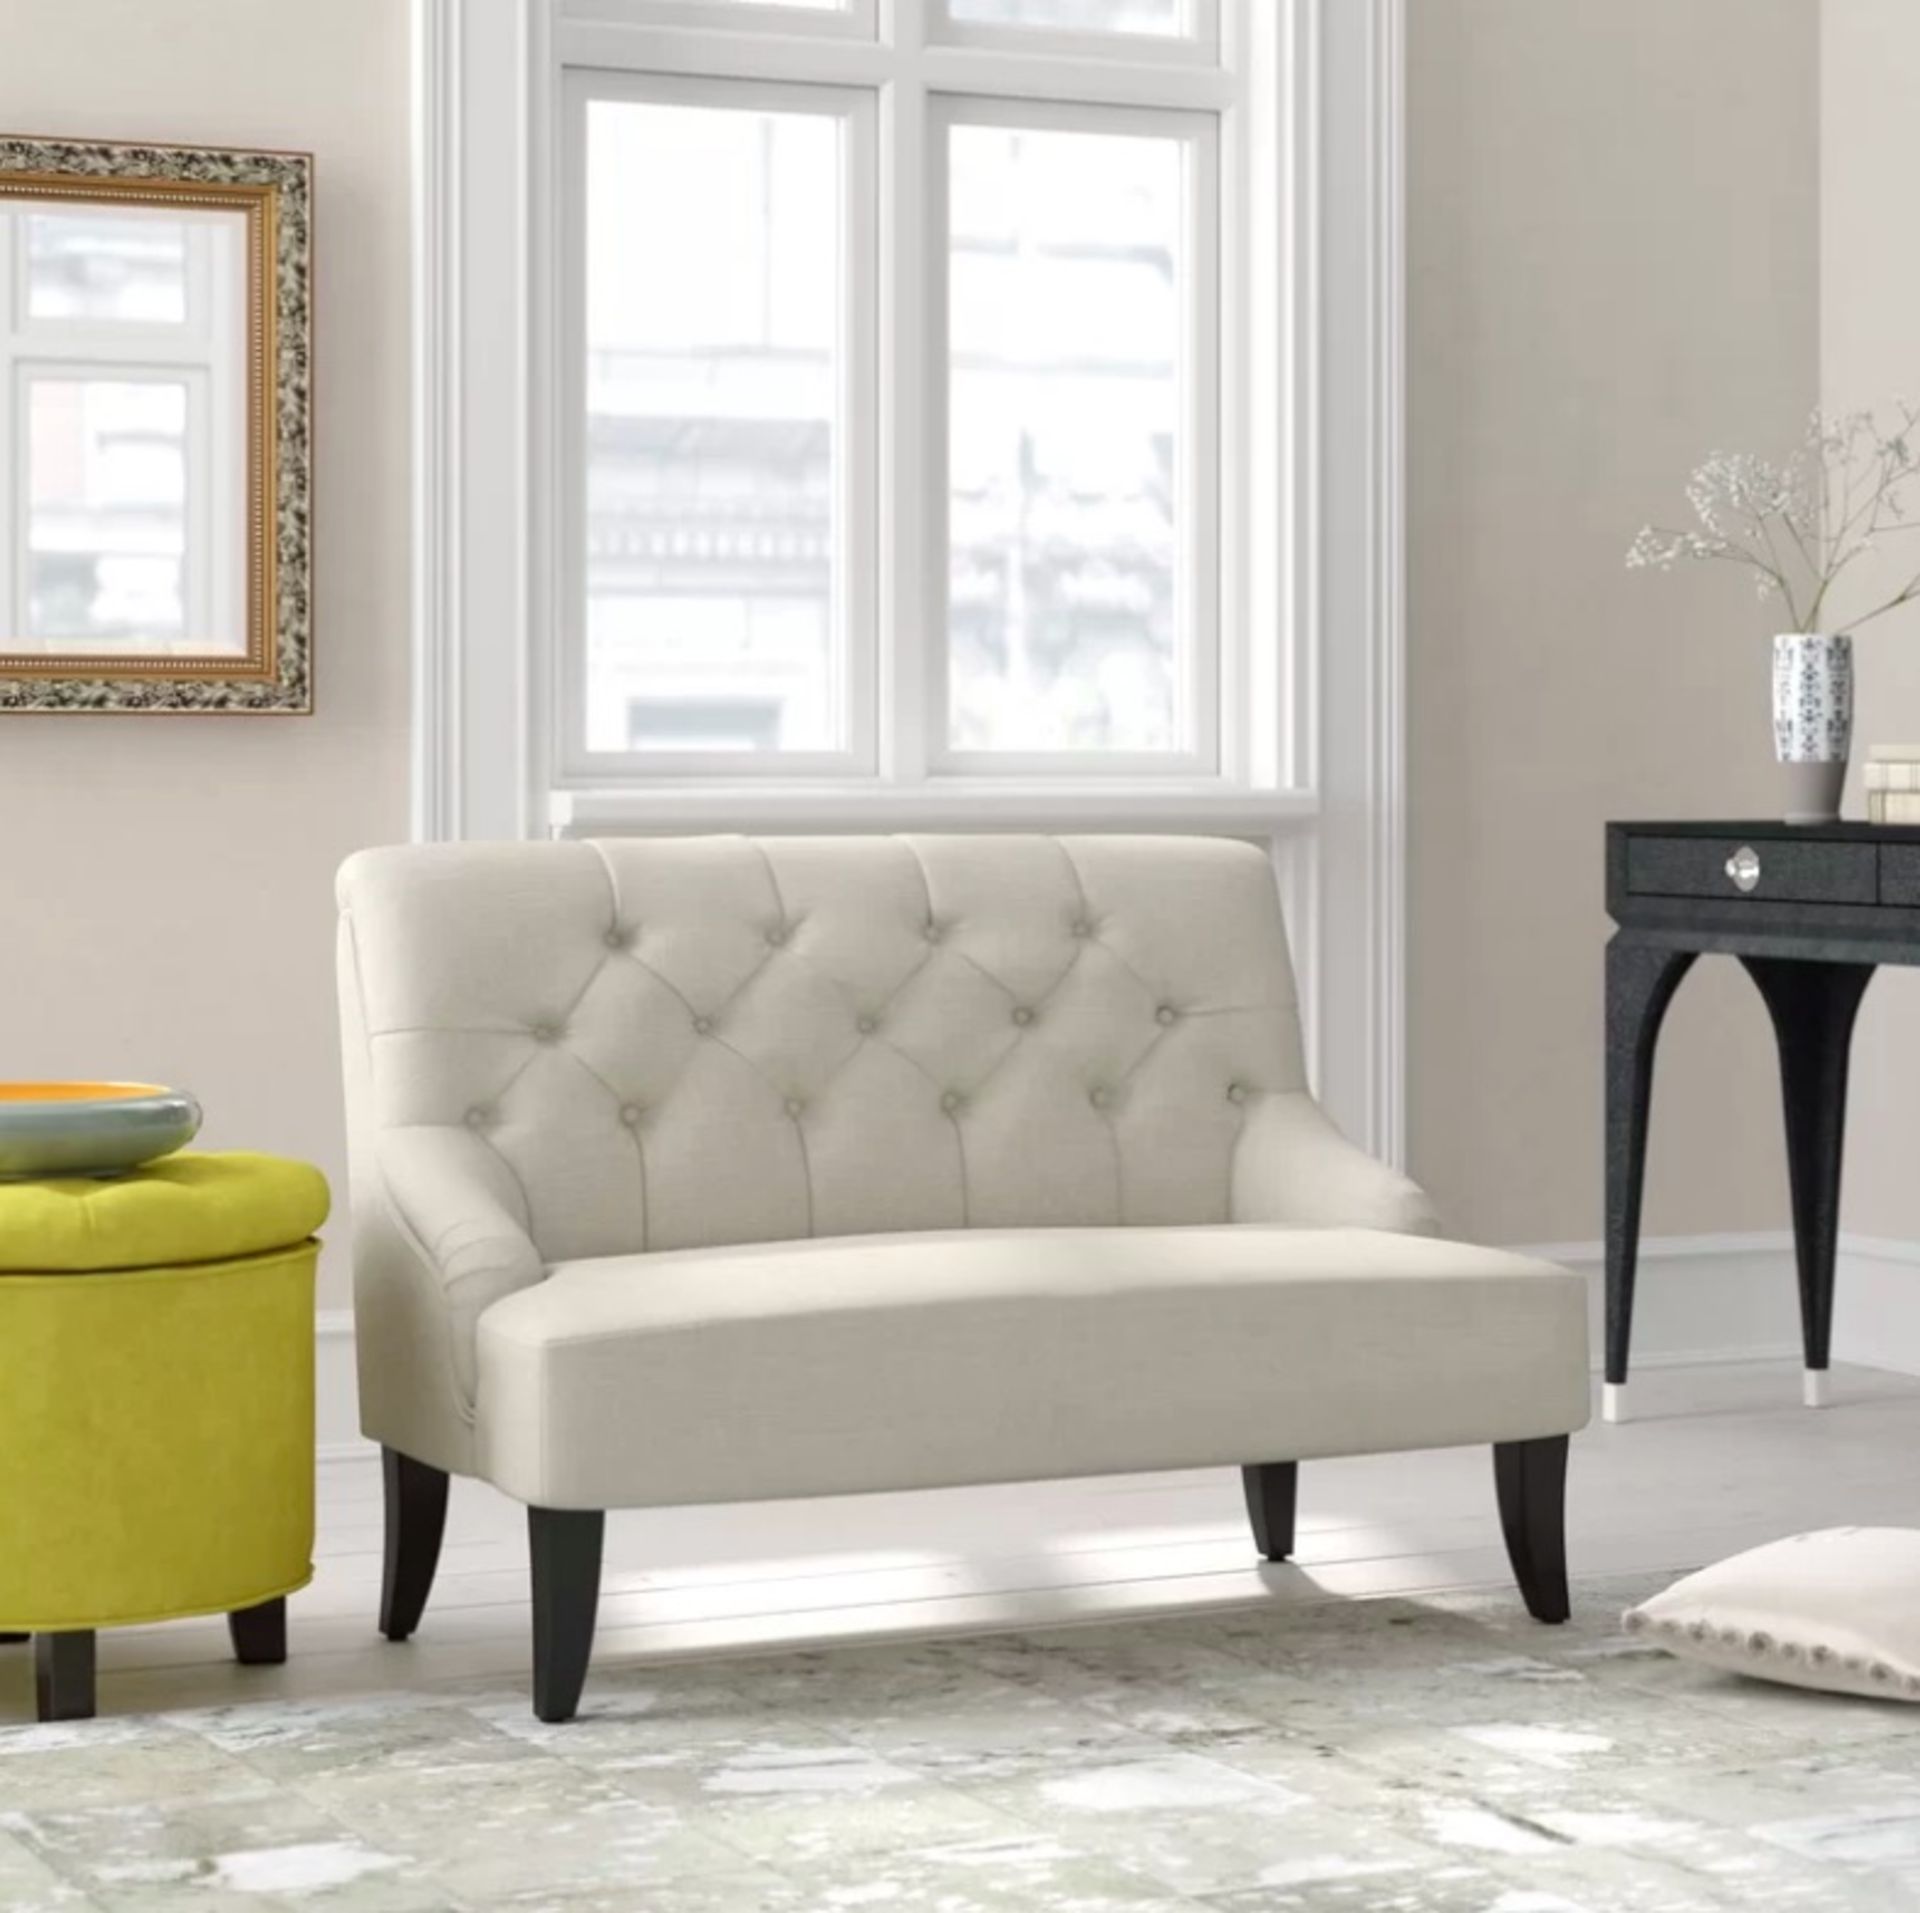 French Loveseat The Loveseat Offers Seating With A Design Derived From French Colonialism. The Curve